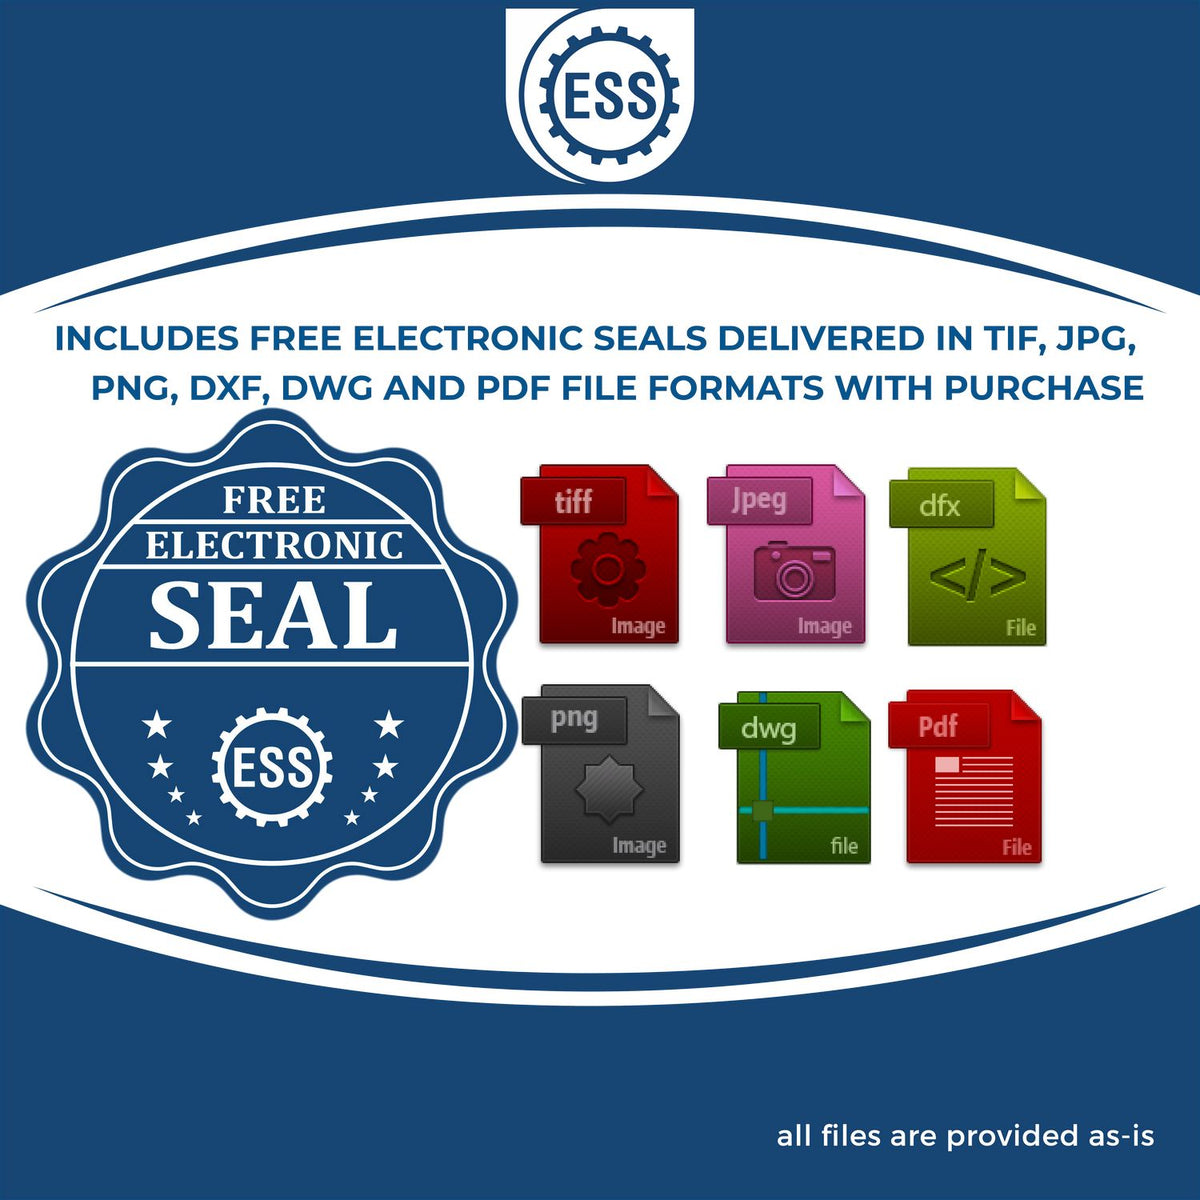 An infographic for the free electronic seal for the Soft Montana Professional Geologist Seal illustrating the different file type icons such as DXF, DWG, TIF, JPG and PNG.